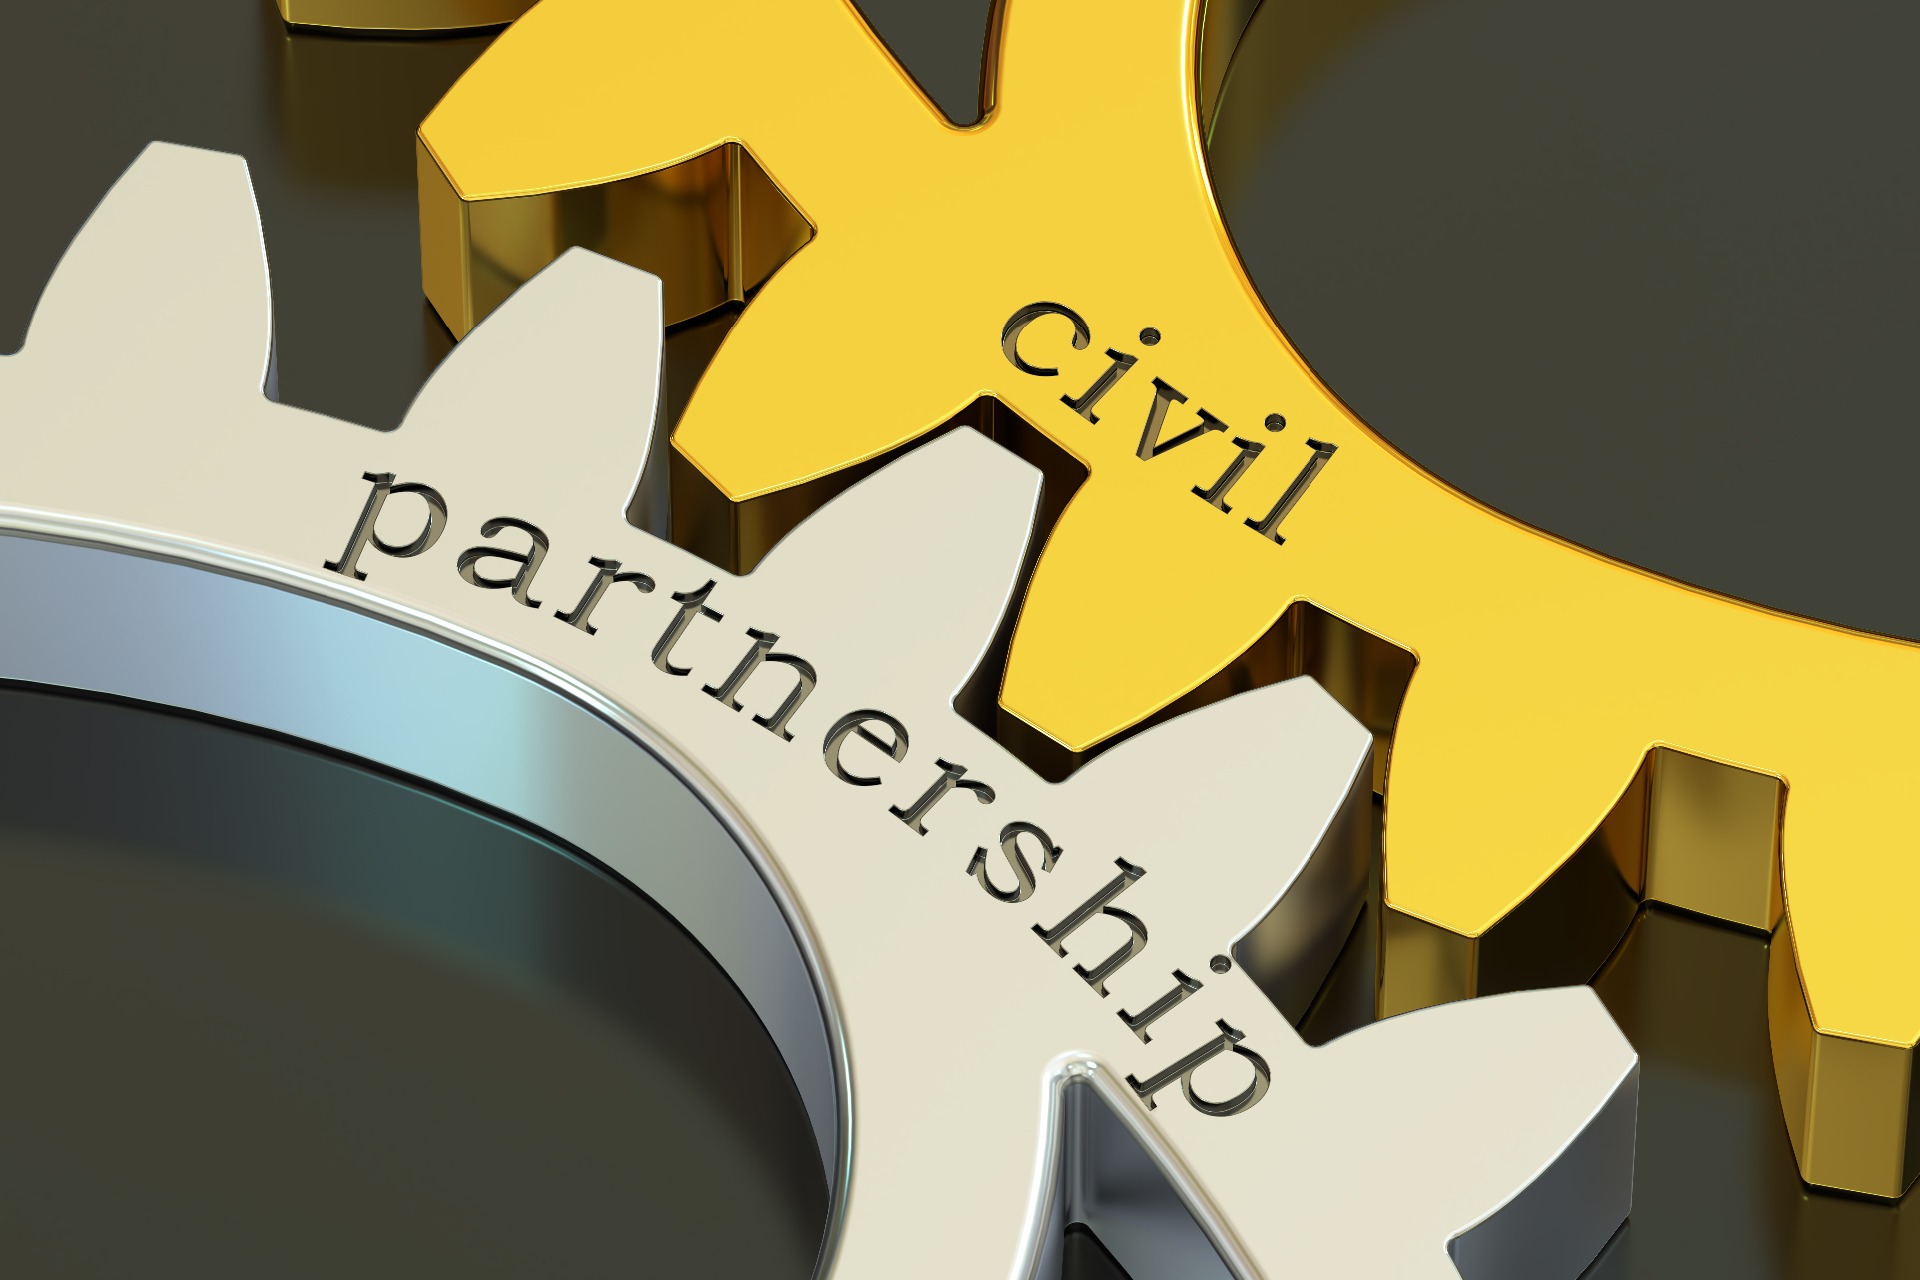 Two intertwined cogs; one saying Civil, the other saying Partnership.